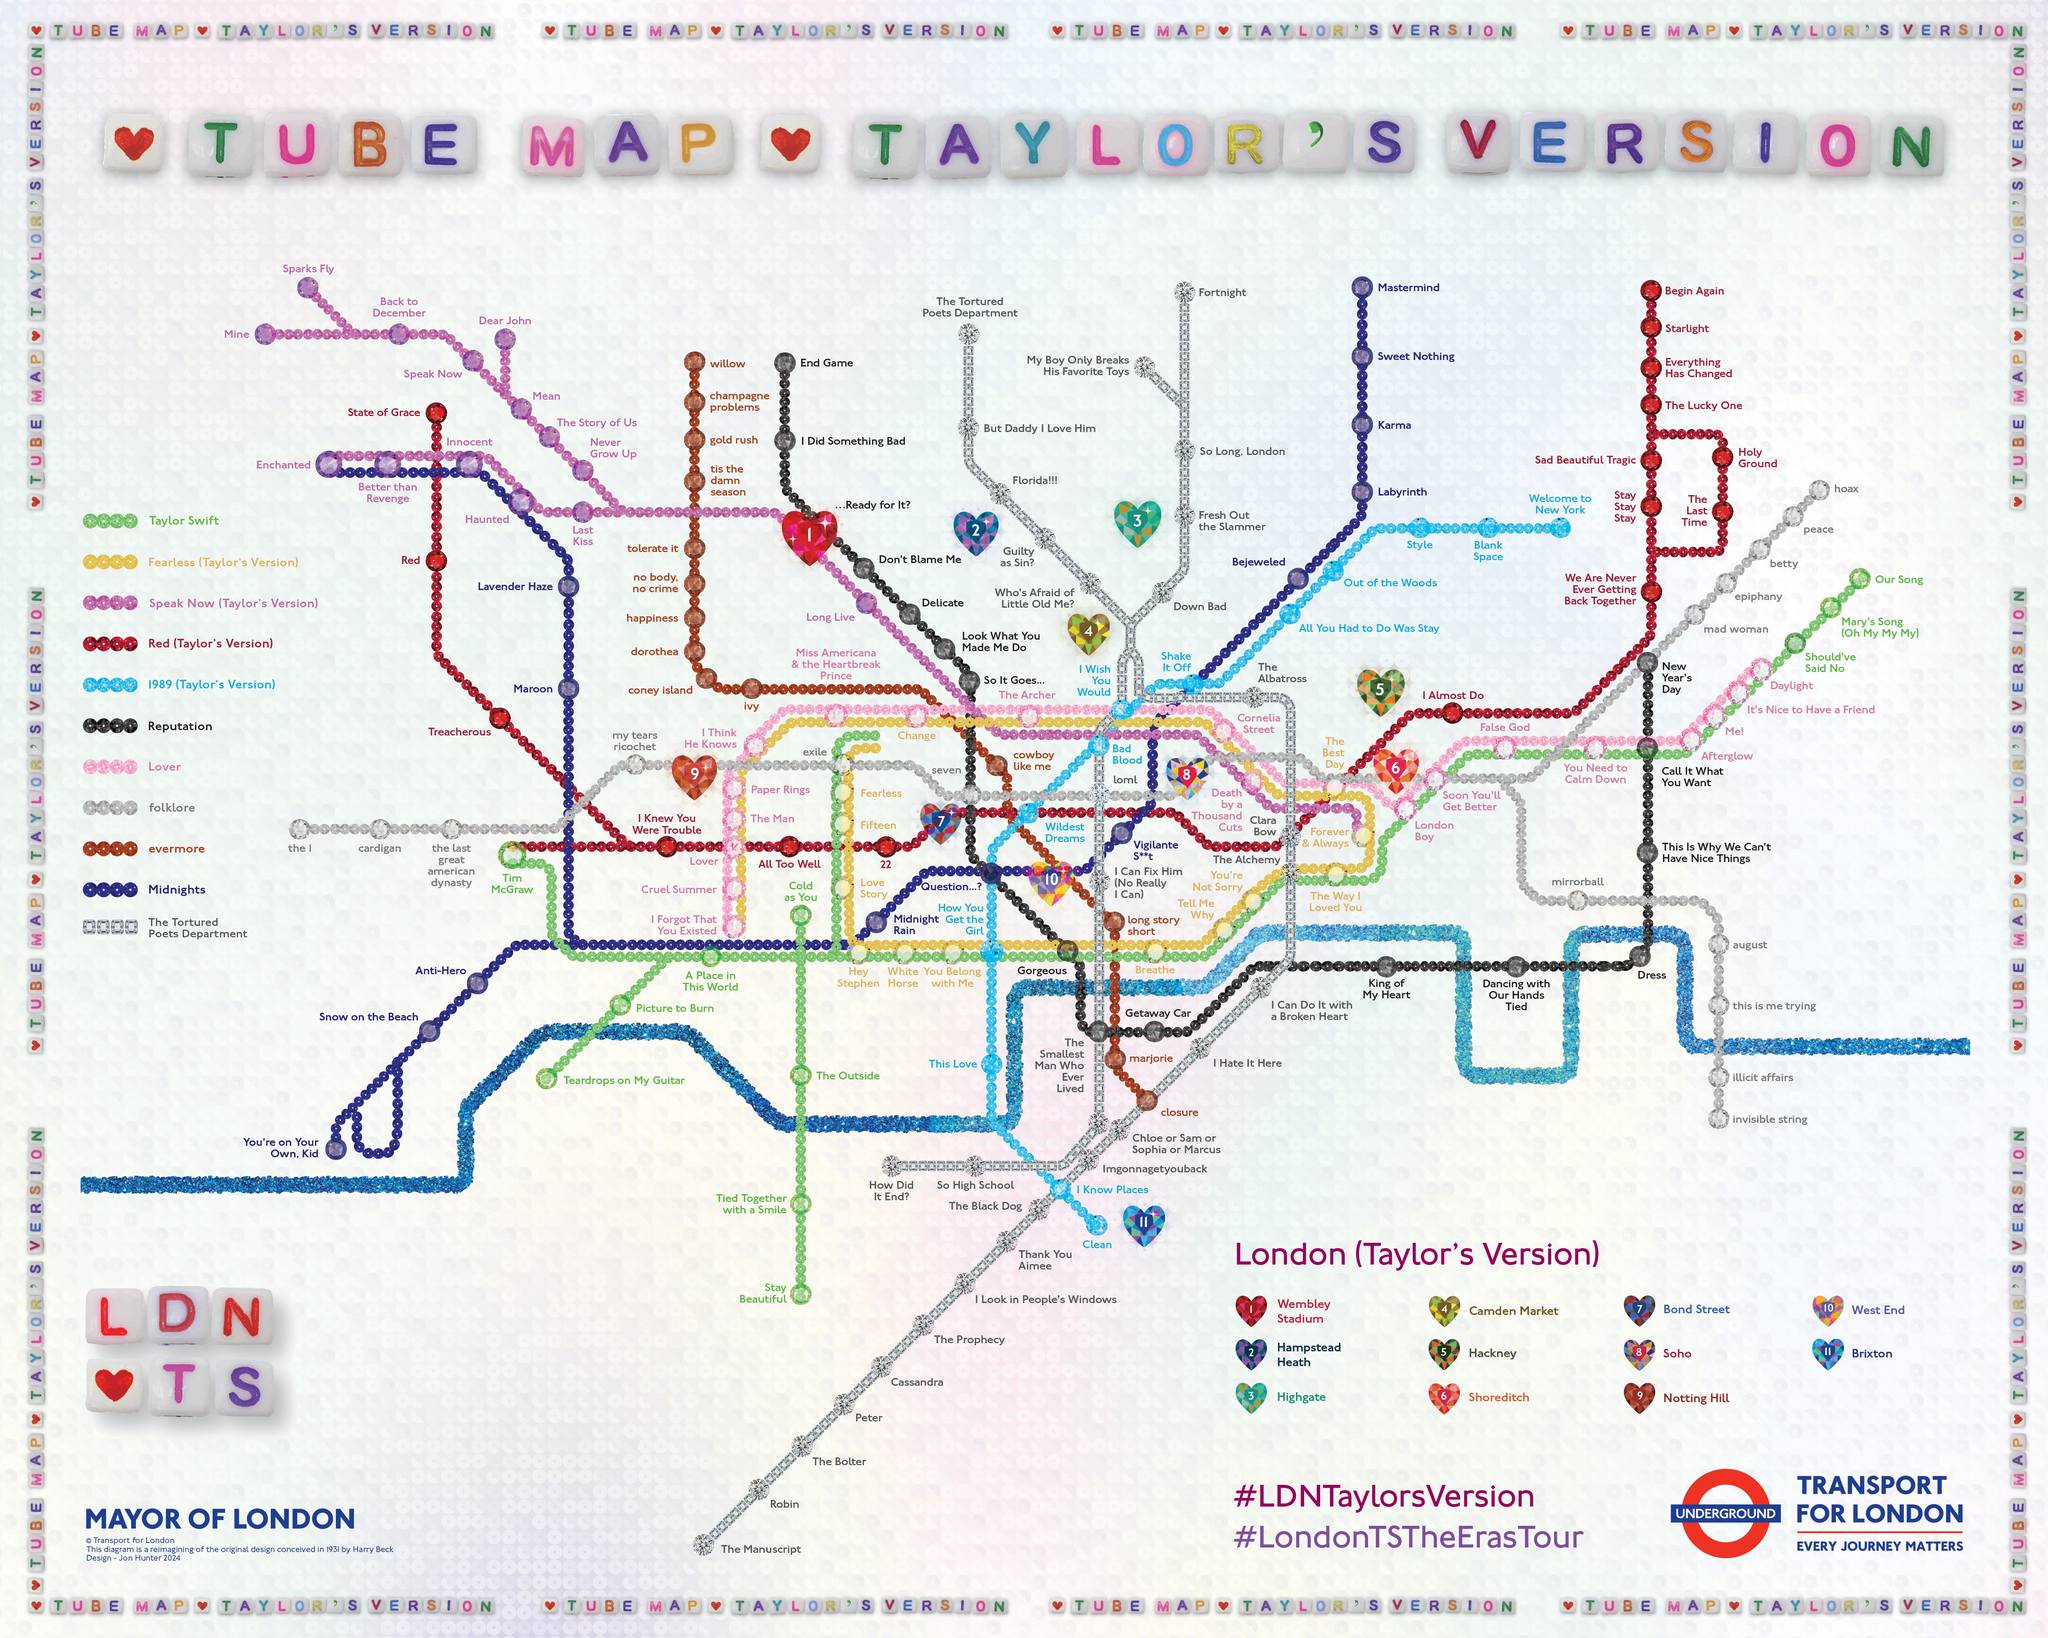 The London Tube map has been redesigned as Taylor's Version for Taylor Swift performing at Wembly.  Each line is one of her albums, with stops being tracks on those albums.